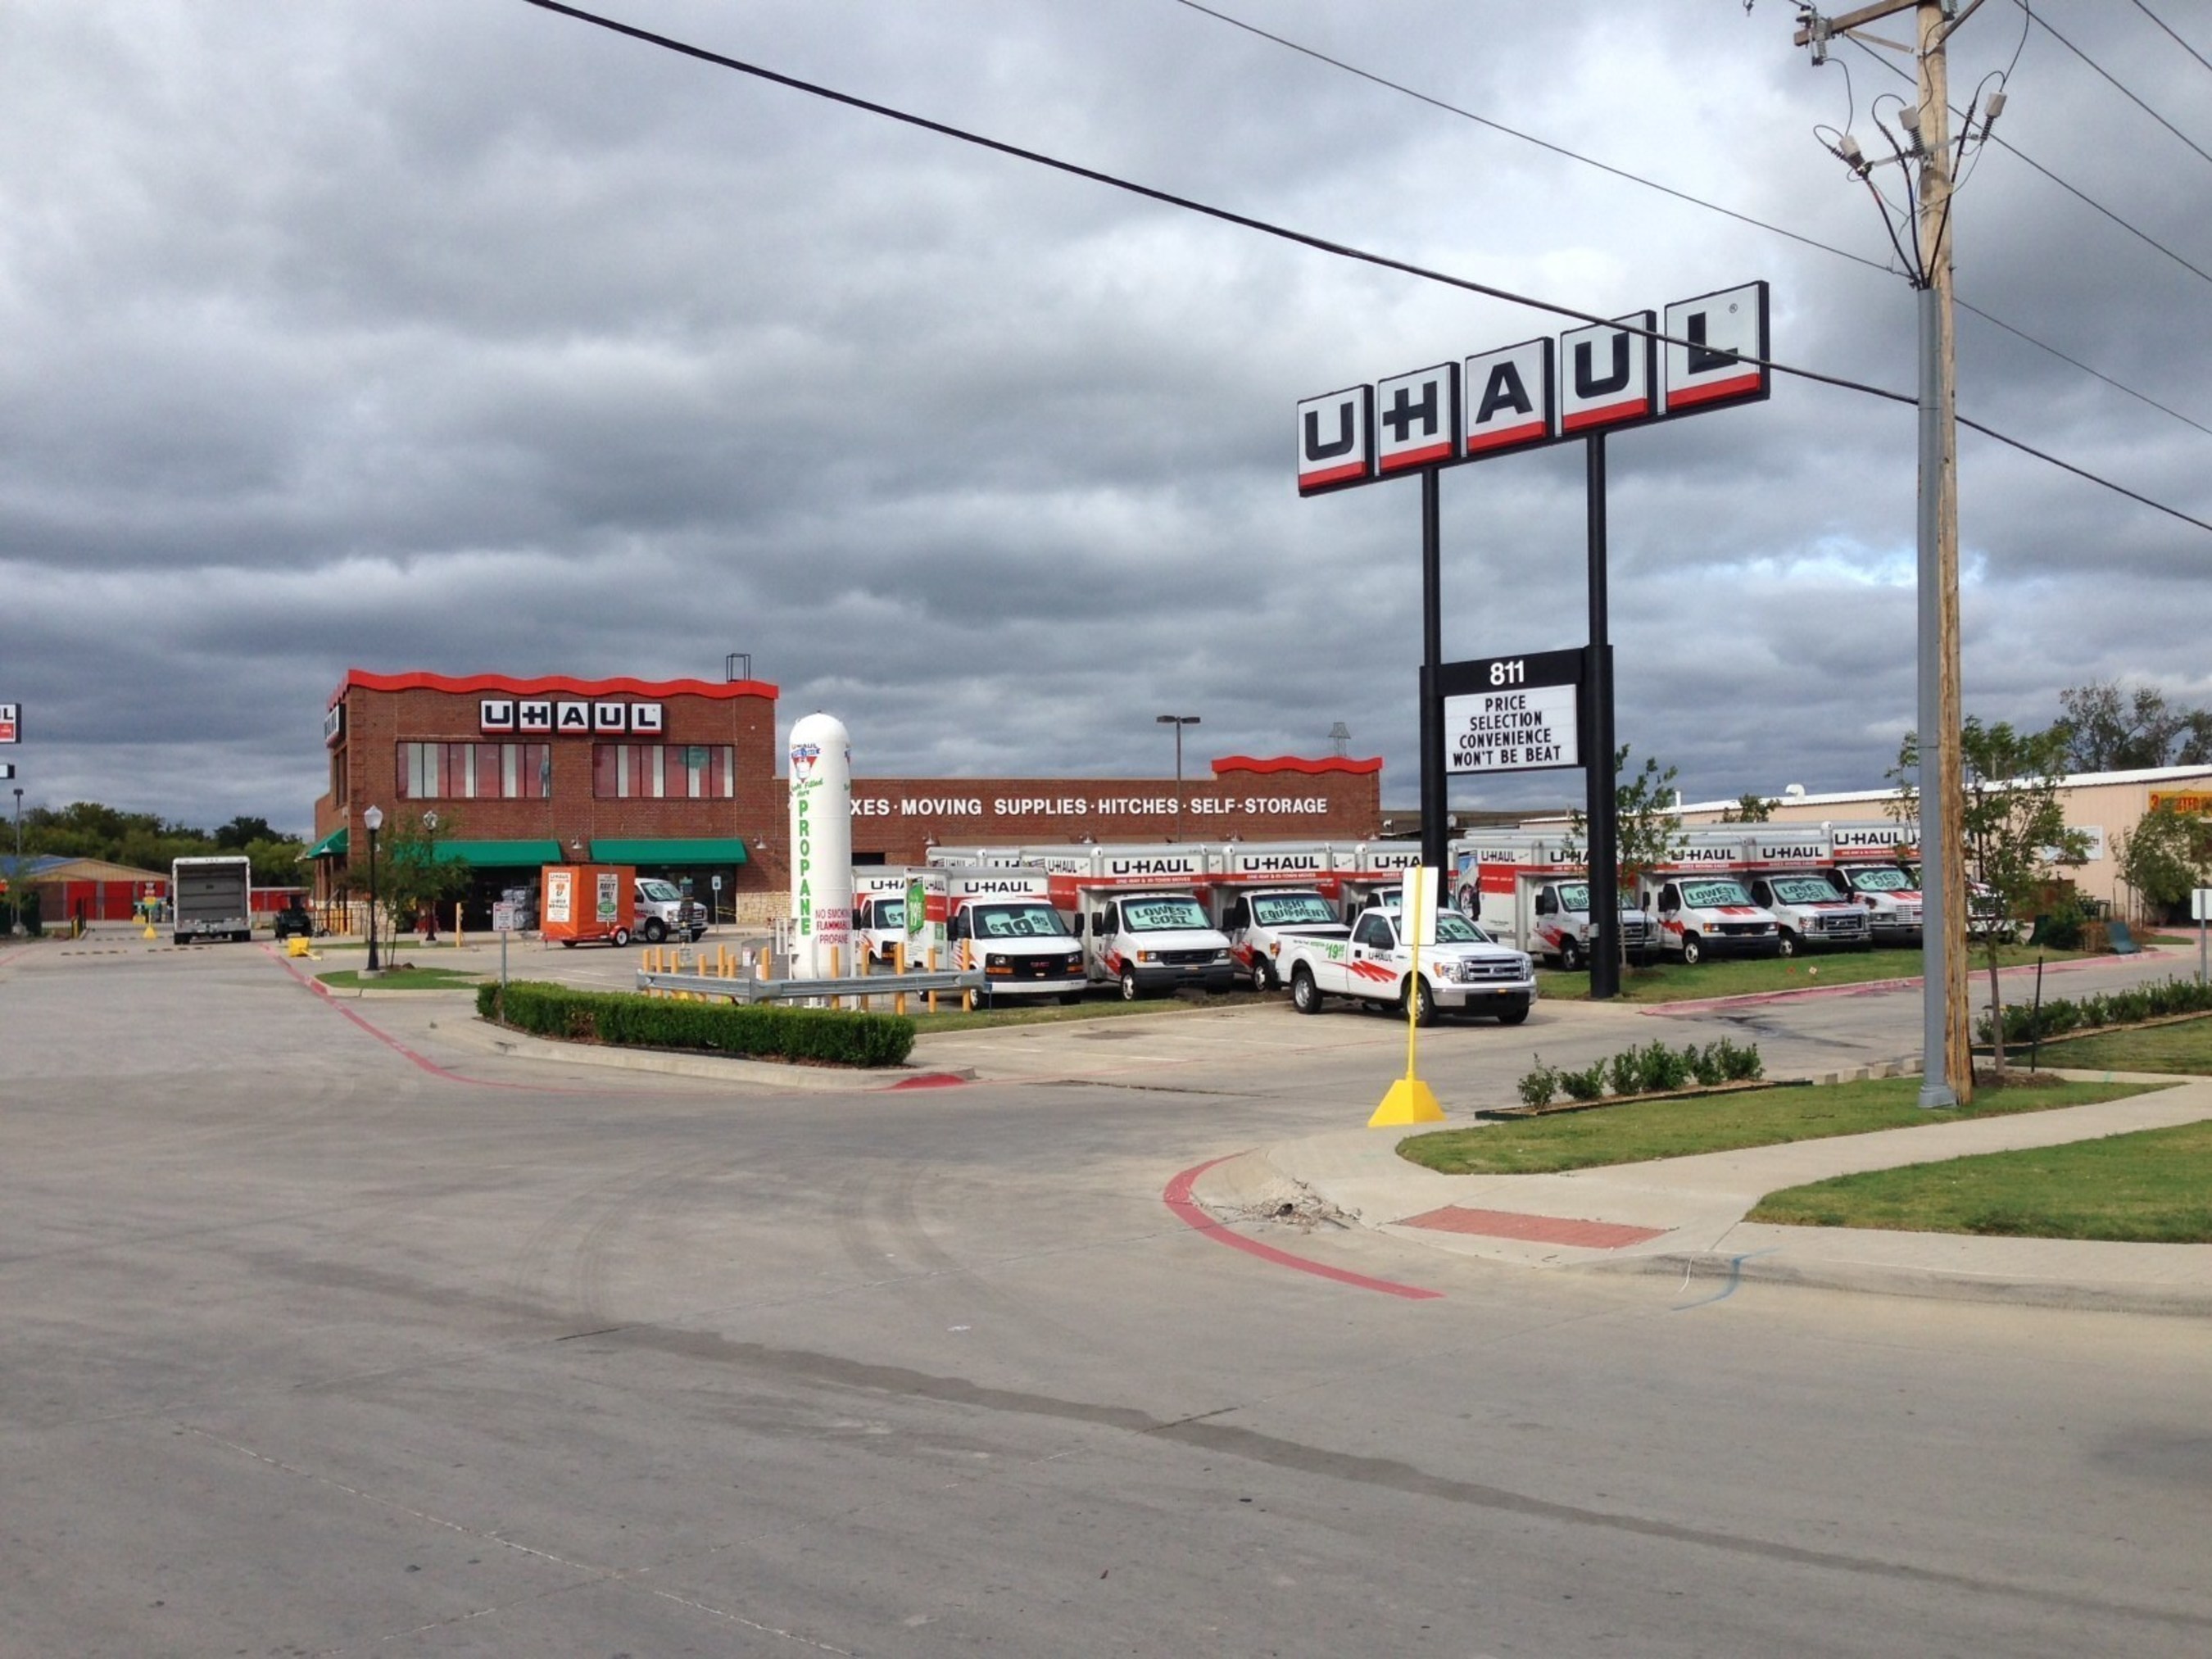 U-Haul customers in and around Lewisville have a secure and convenient place to store their RVs and boats with the recent expansion at U-Haul Moving & Storage of Lake Lewisville at 811 E. State Hwy. 121 Business.